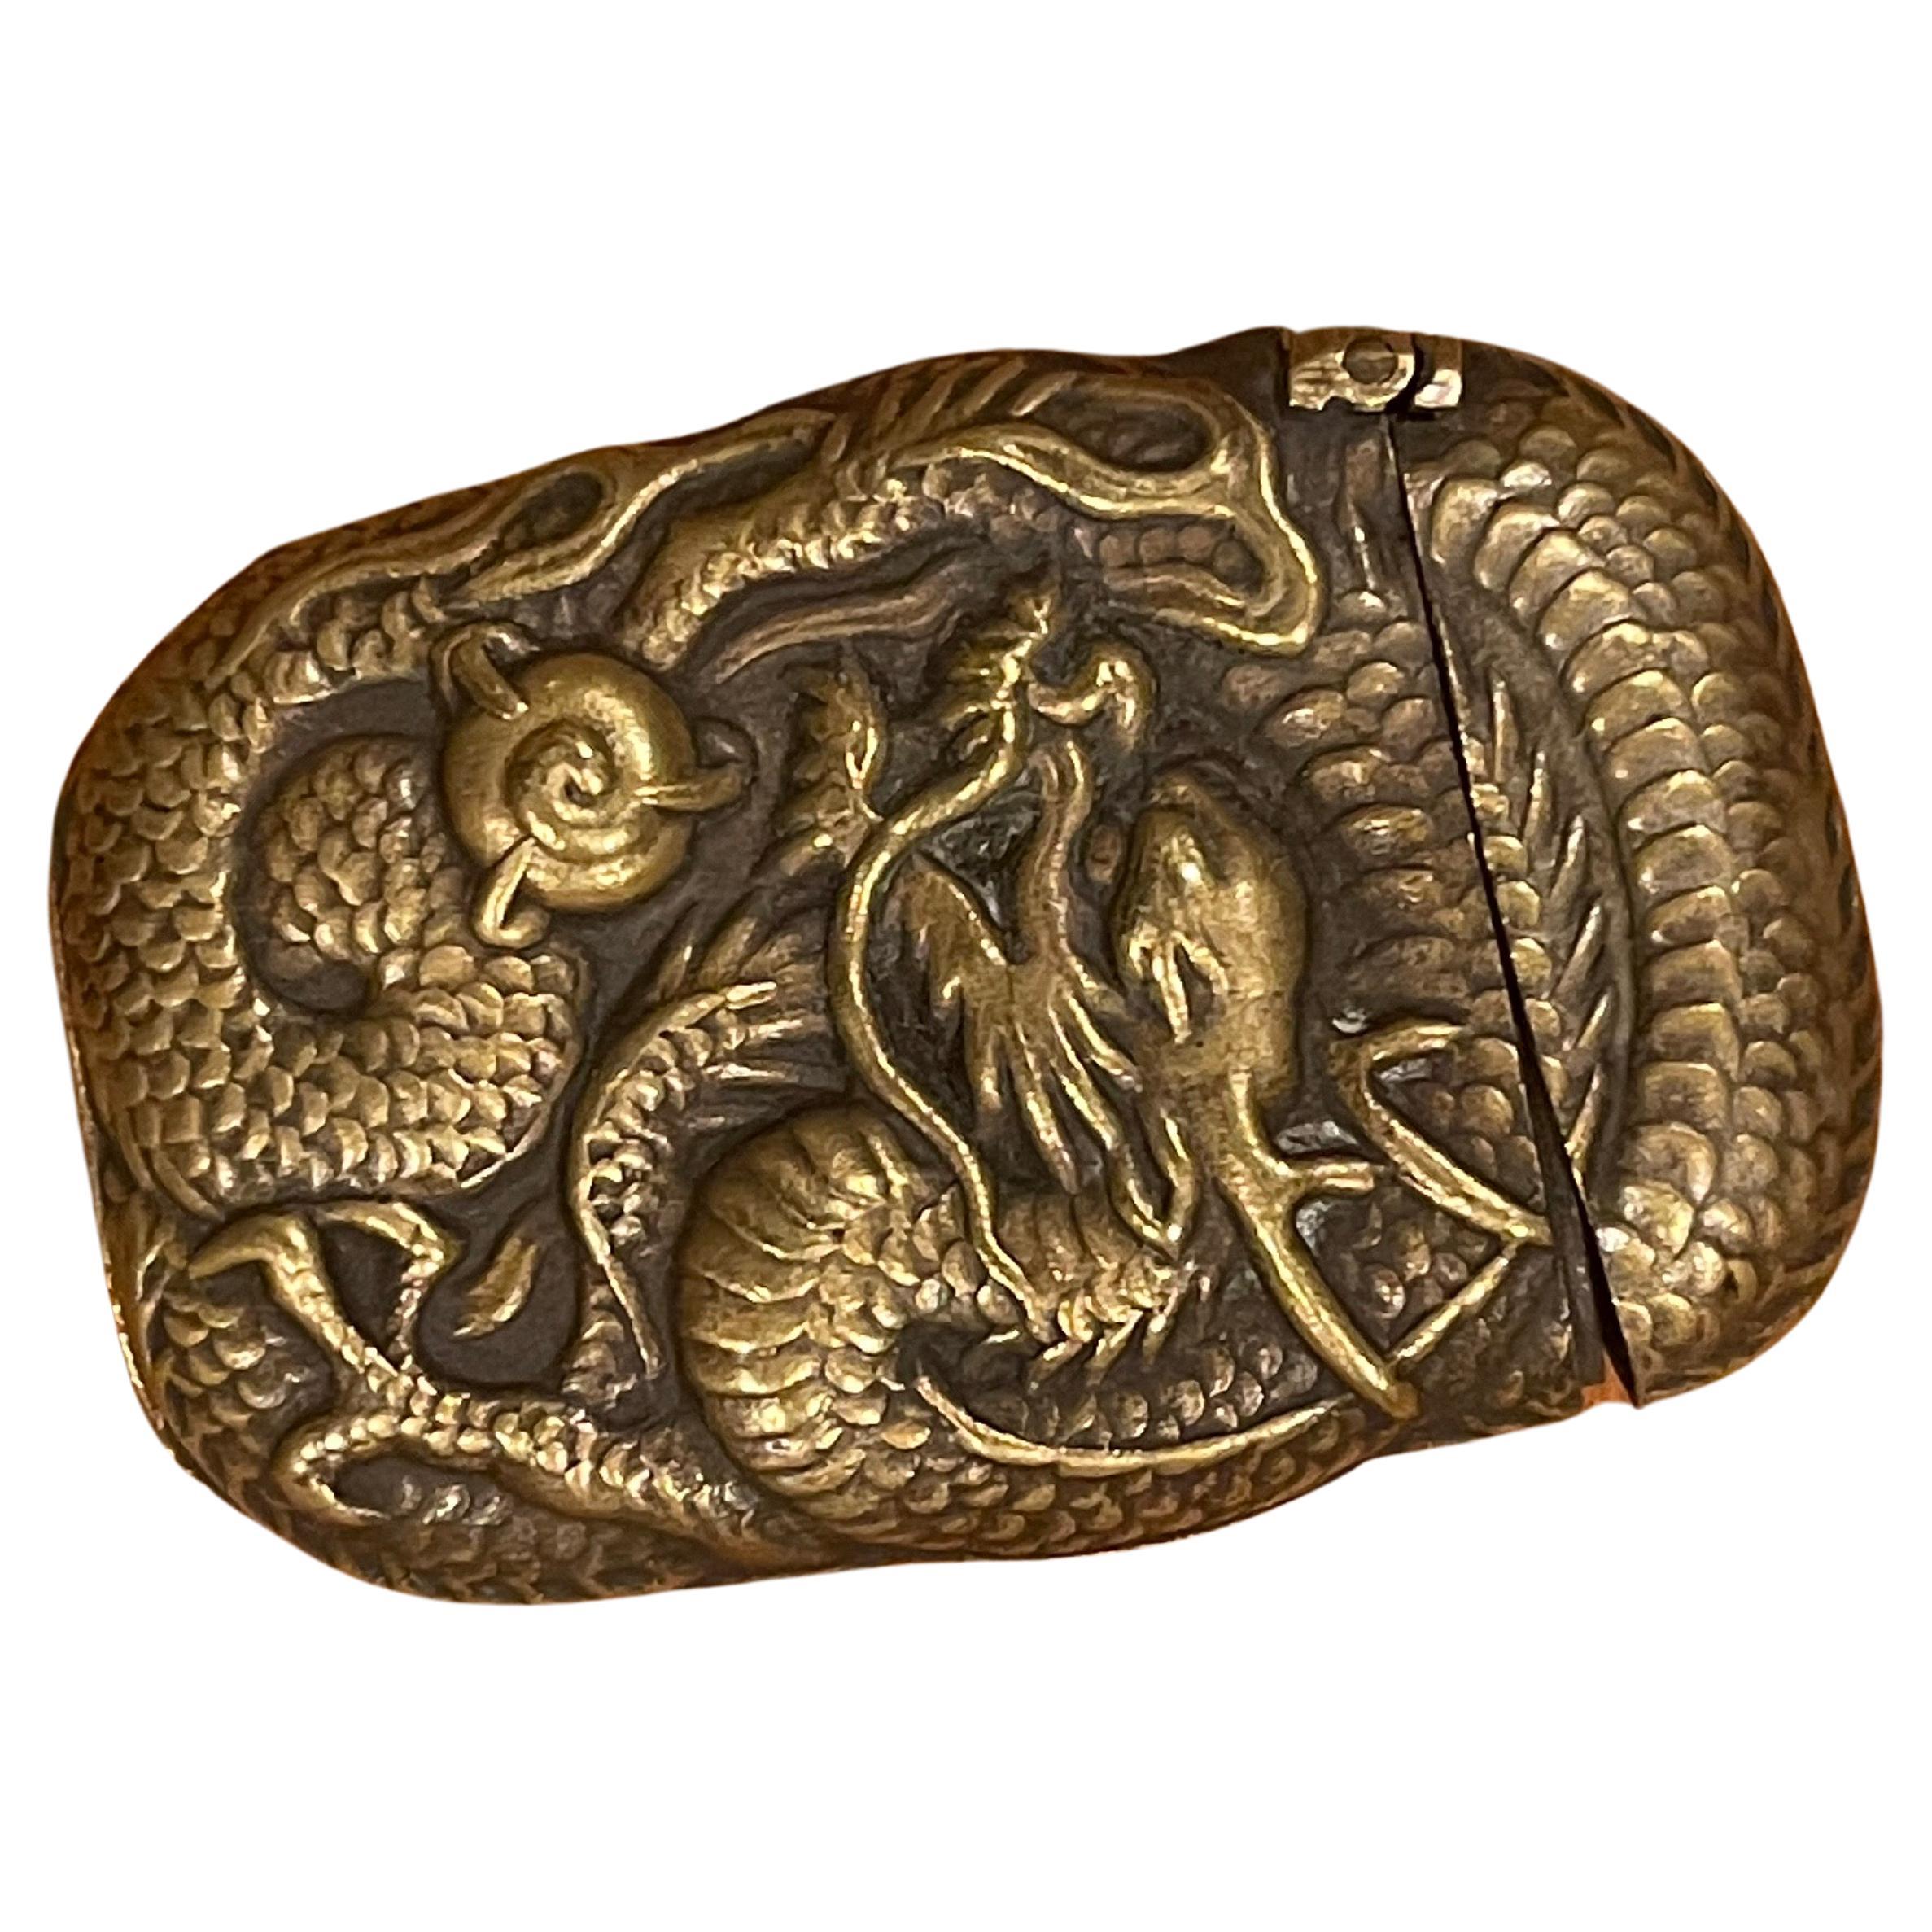 Antique petite bronze dragon / griffin pattern repousse match safe / vesta with an ornate all-over design on both sides, circa 1900s. The match holder measures 1.75